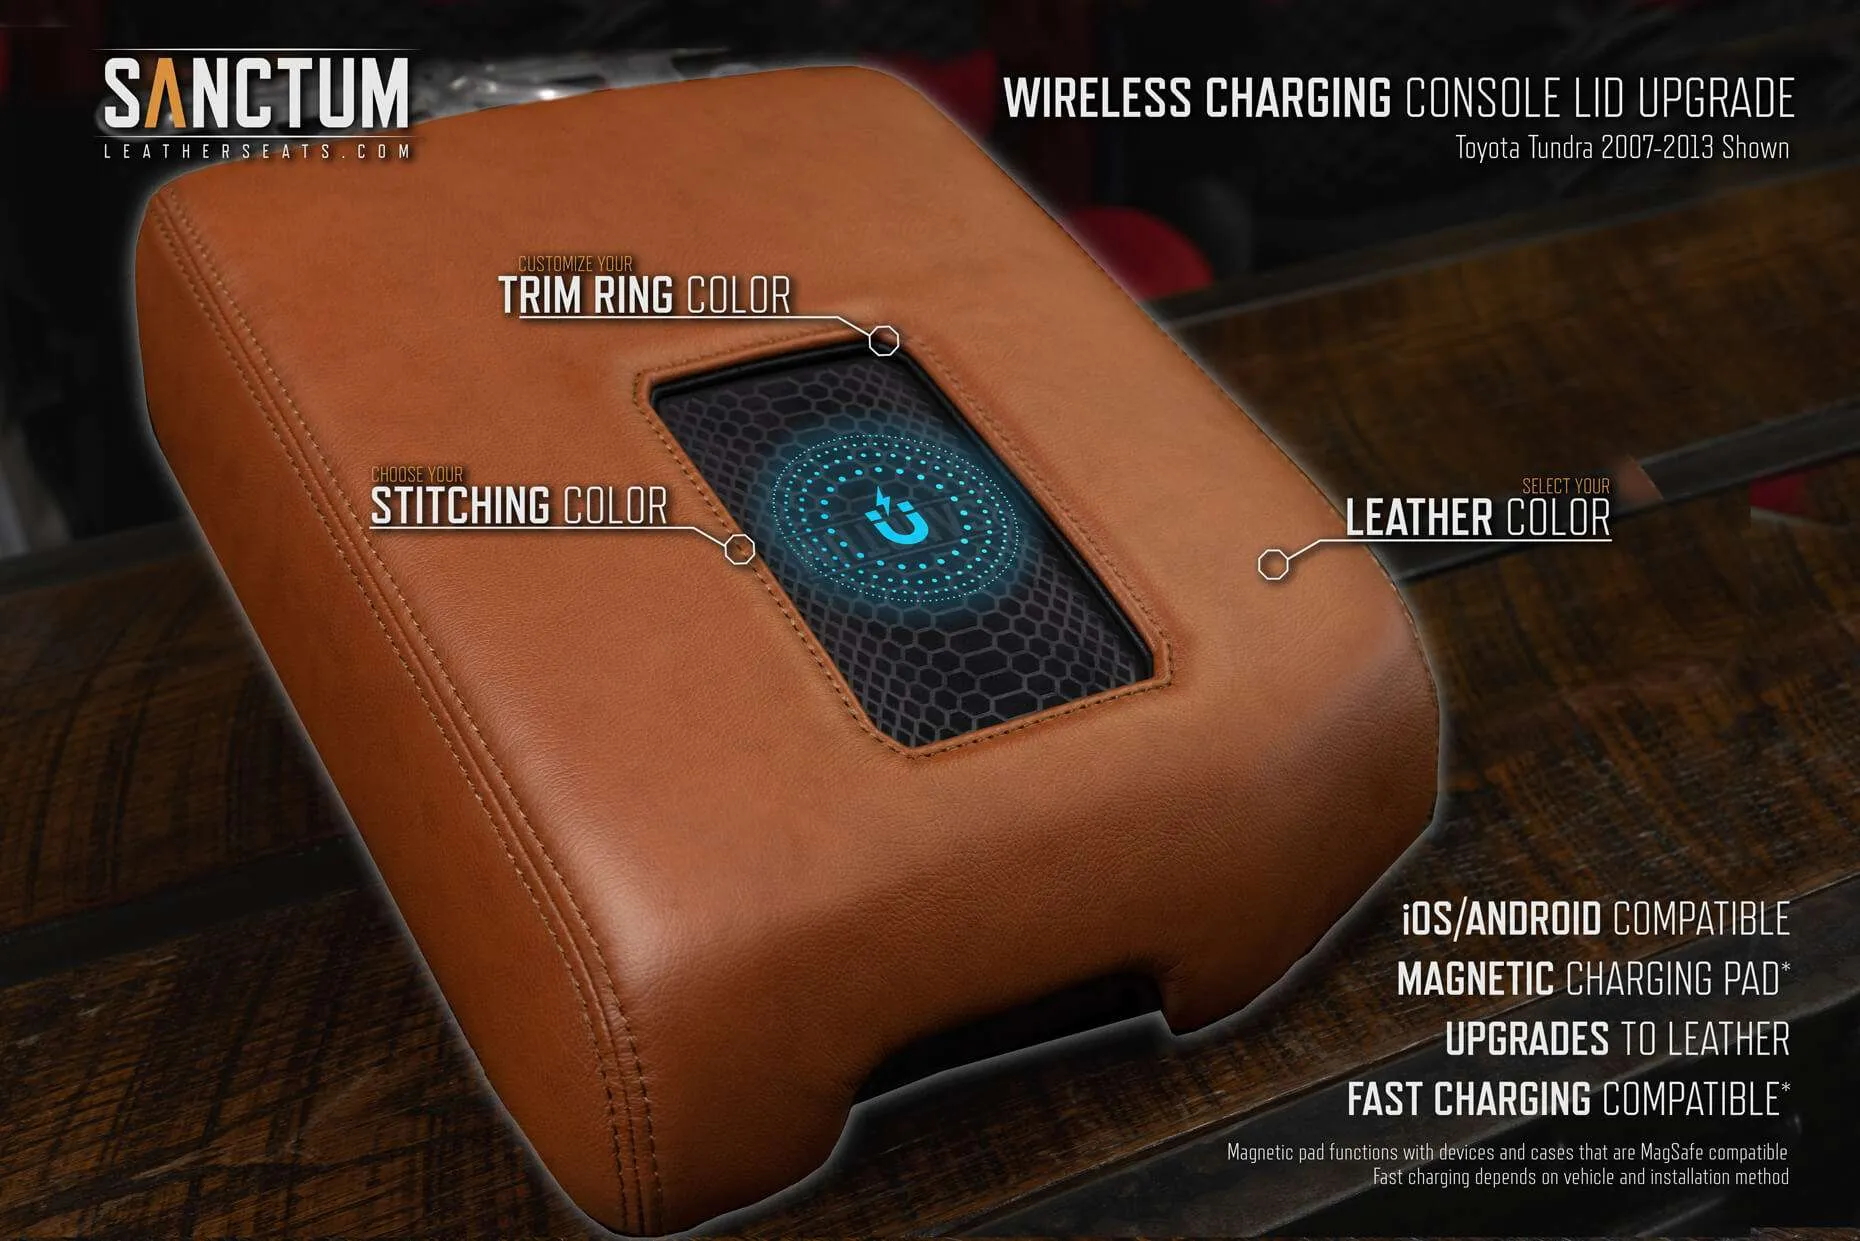 Toyota Tundra '07-13 Sanctum Wireless Charging Console Features